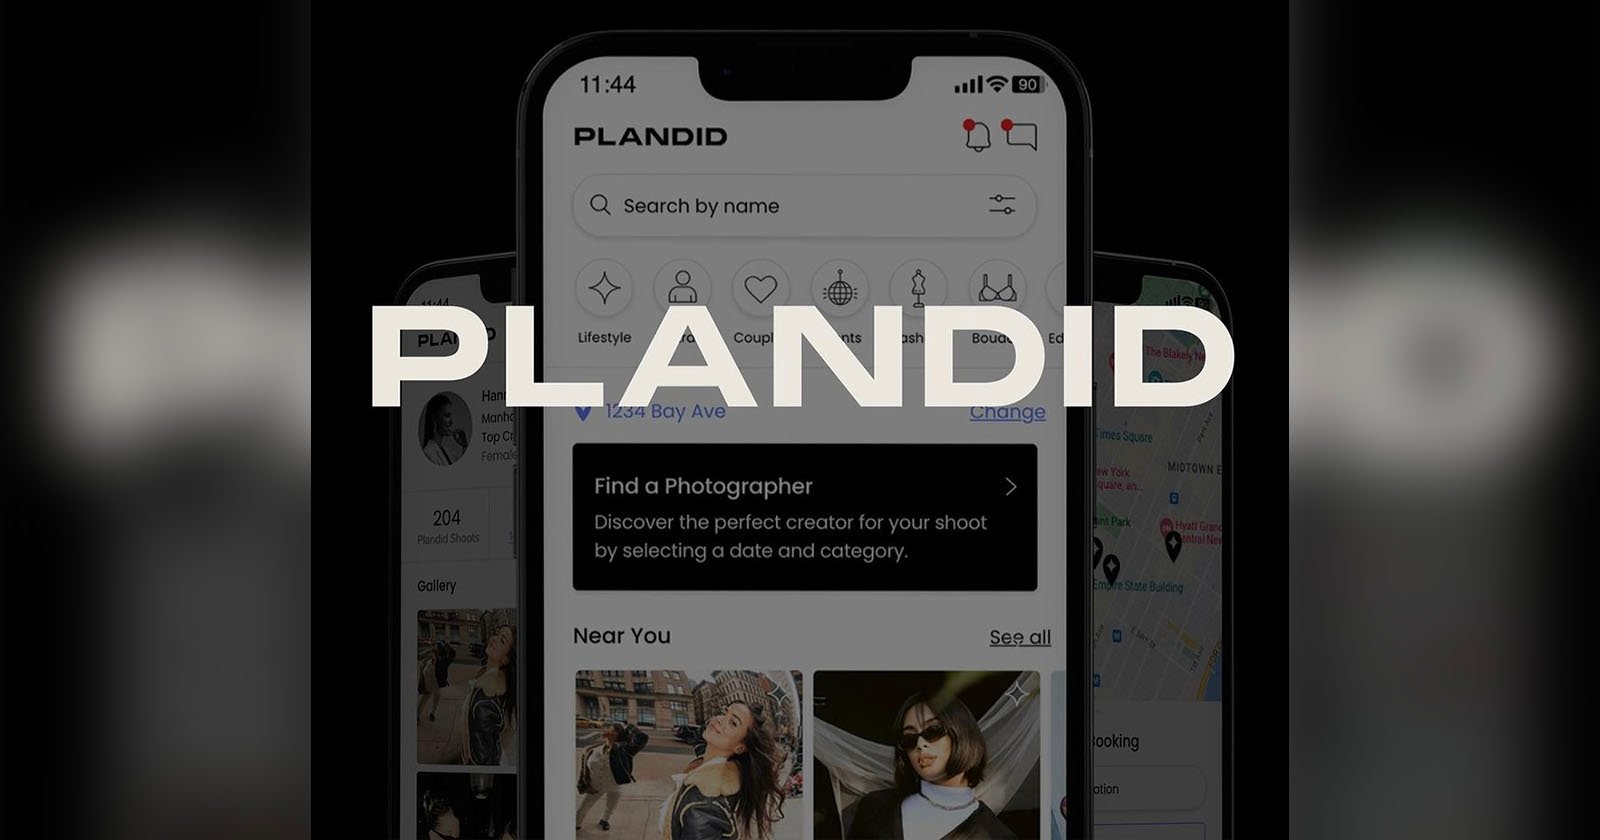 Plandid App Allows You to Instantly Book a Photographer in New York